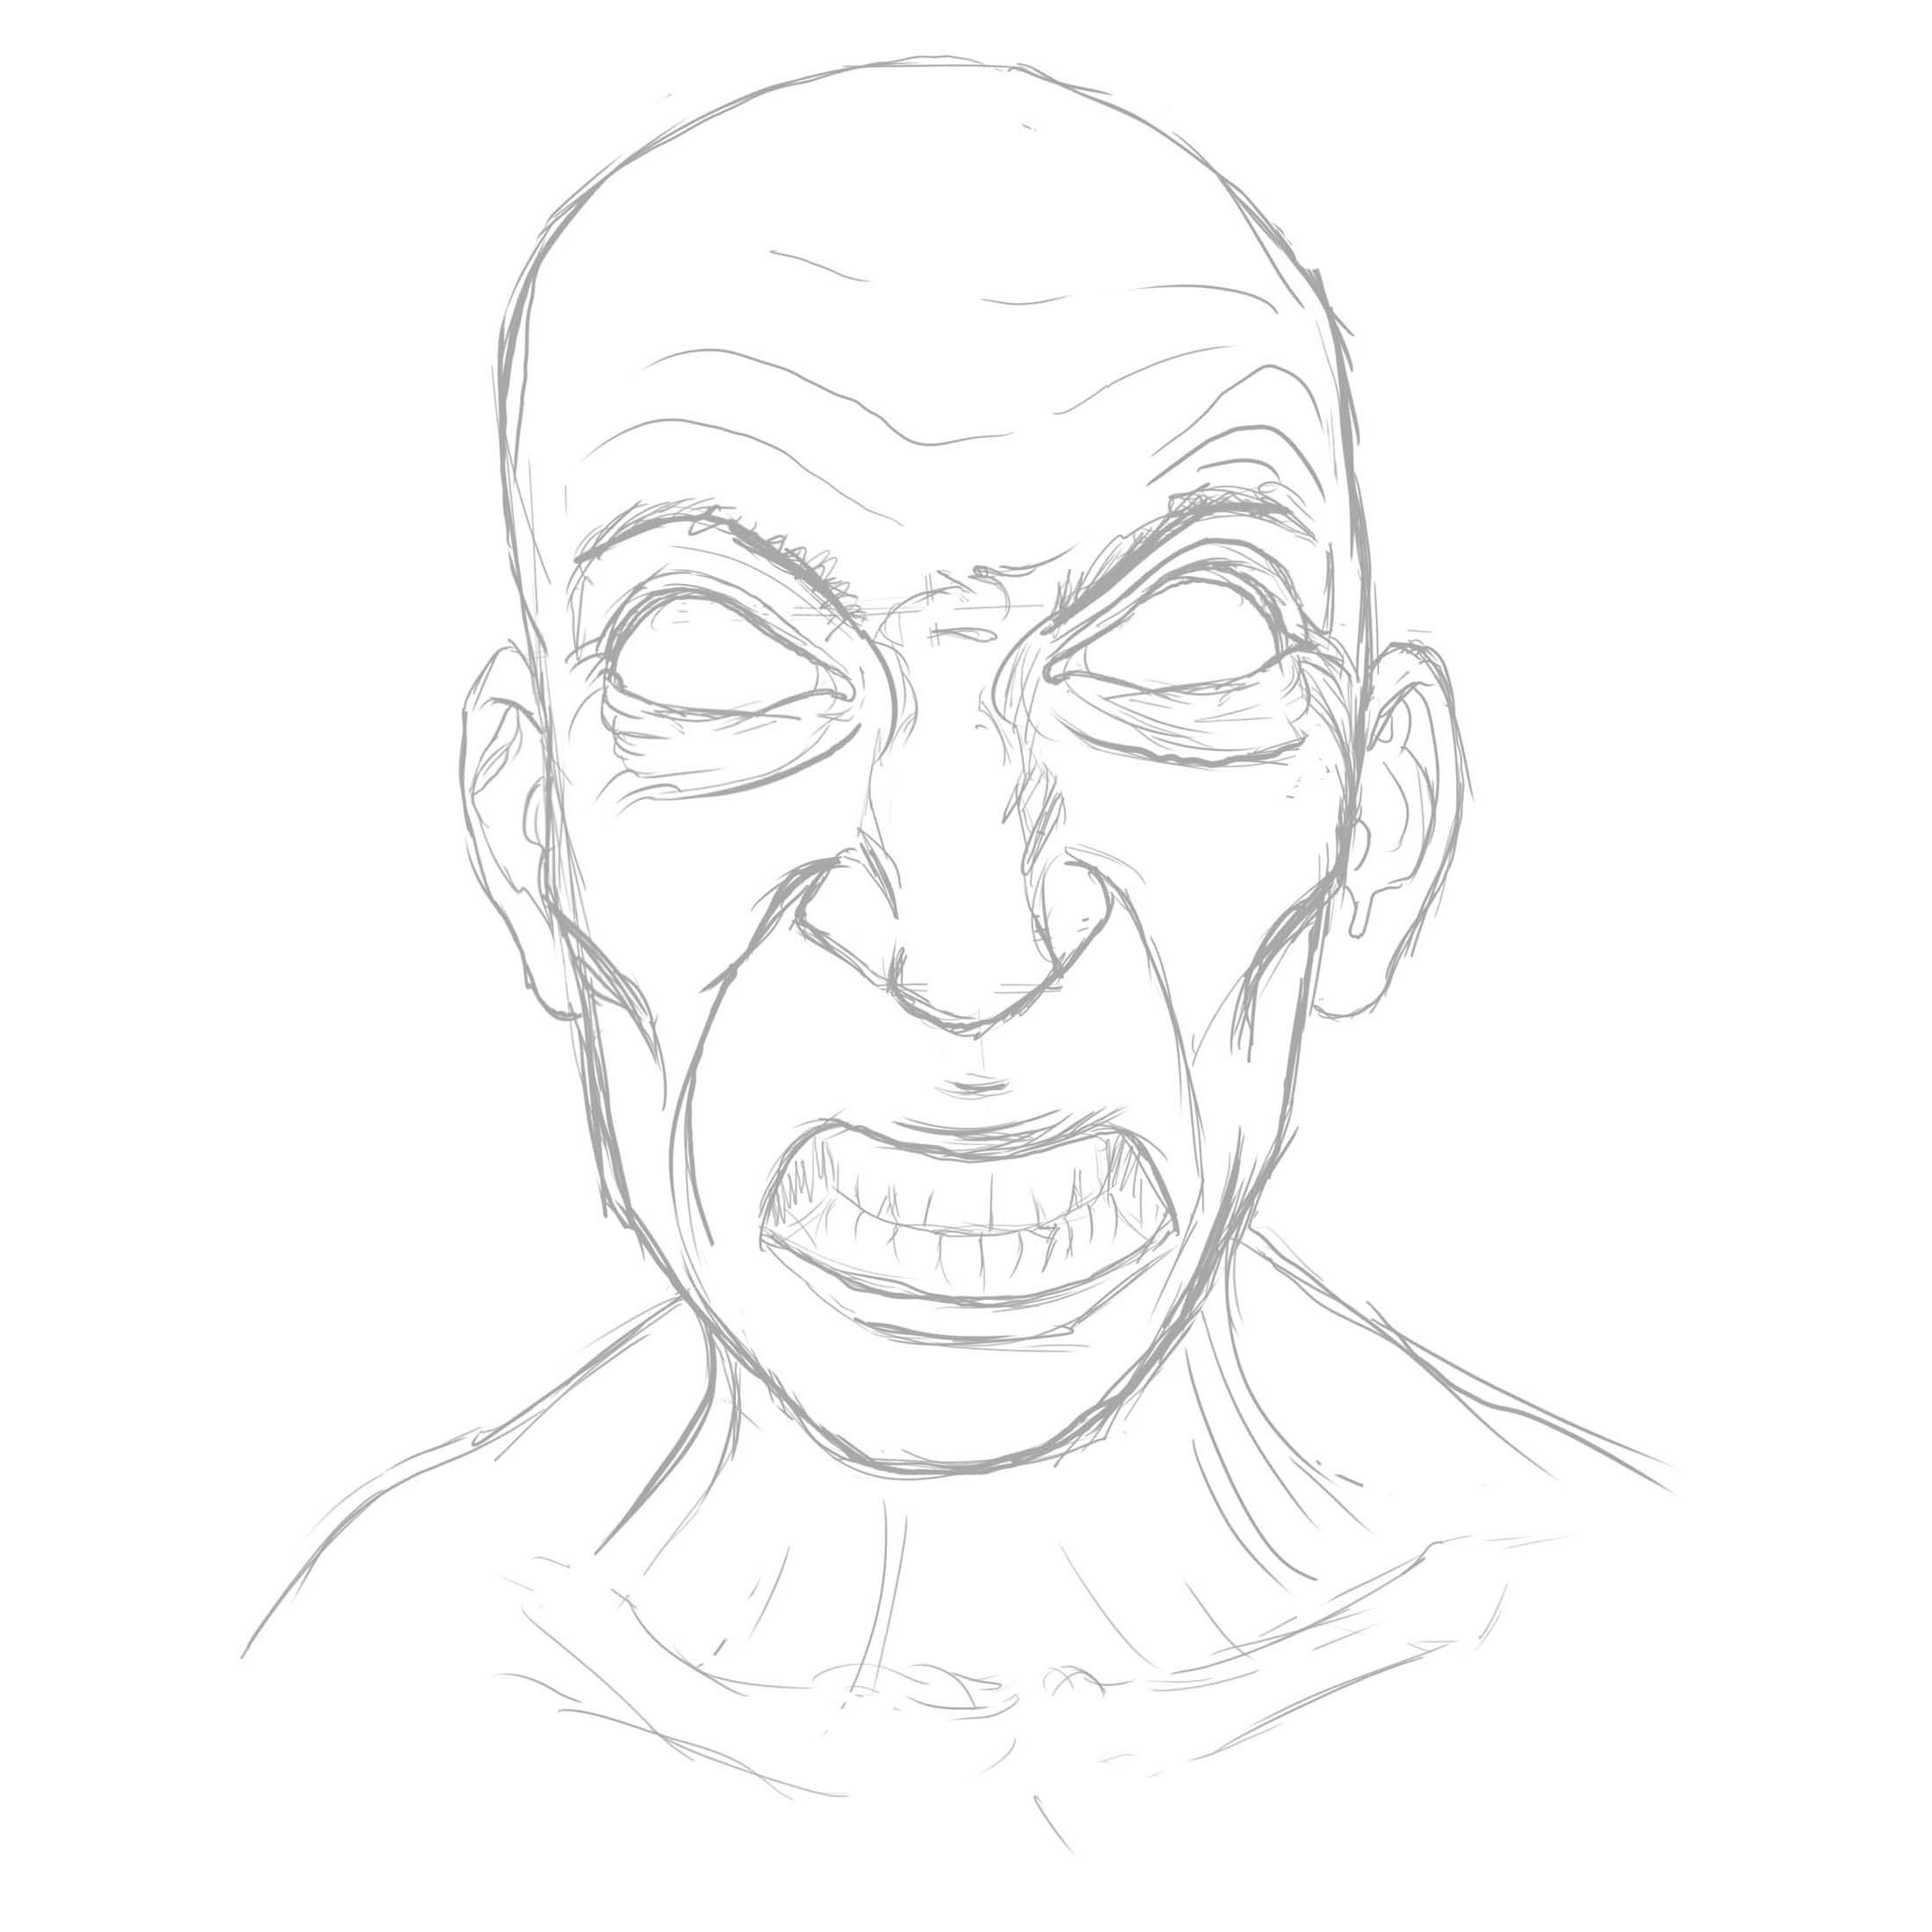 Started with a sketch and just went with the flow. I just knew I wanted him angry and VERY pretty.